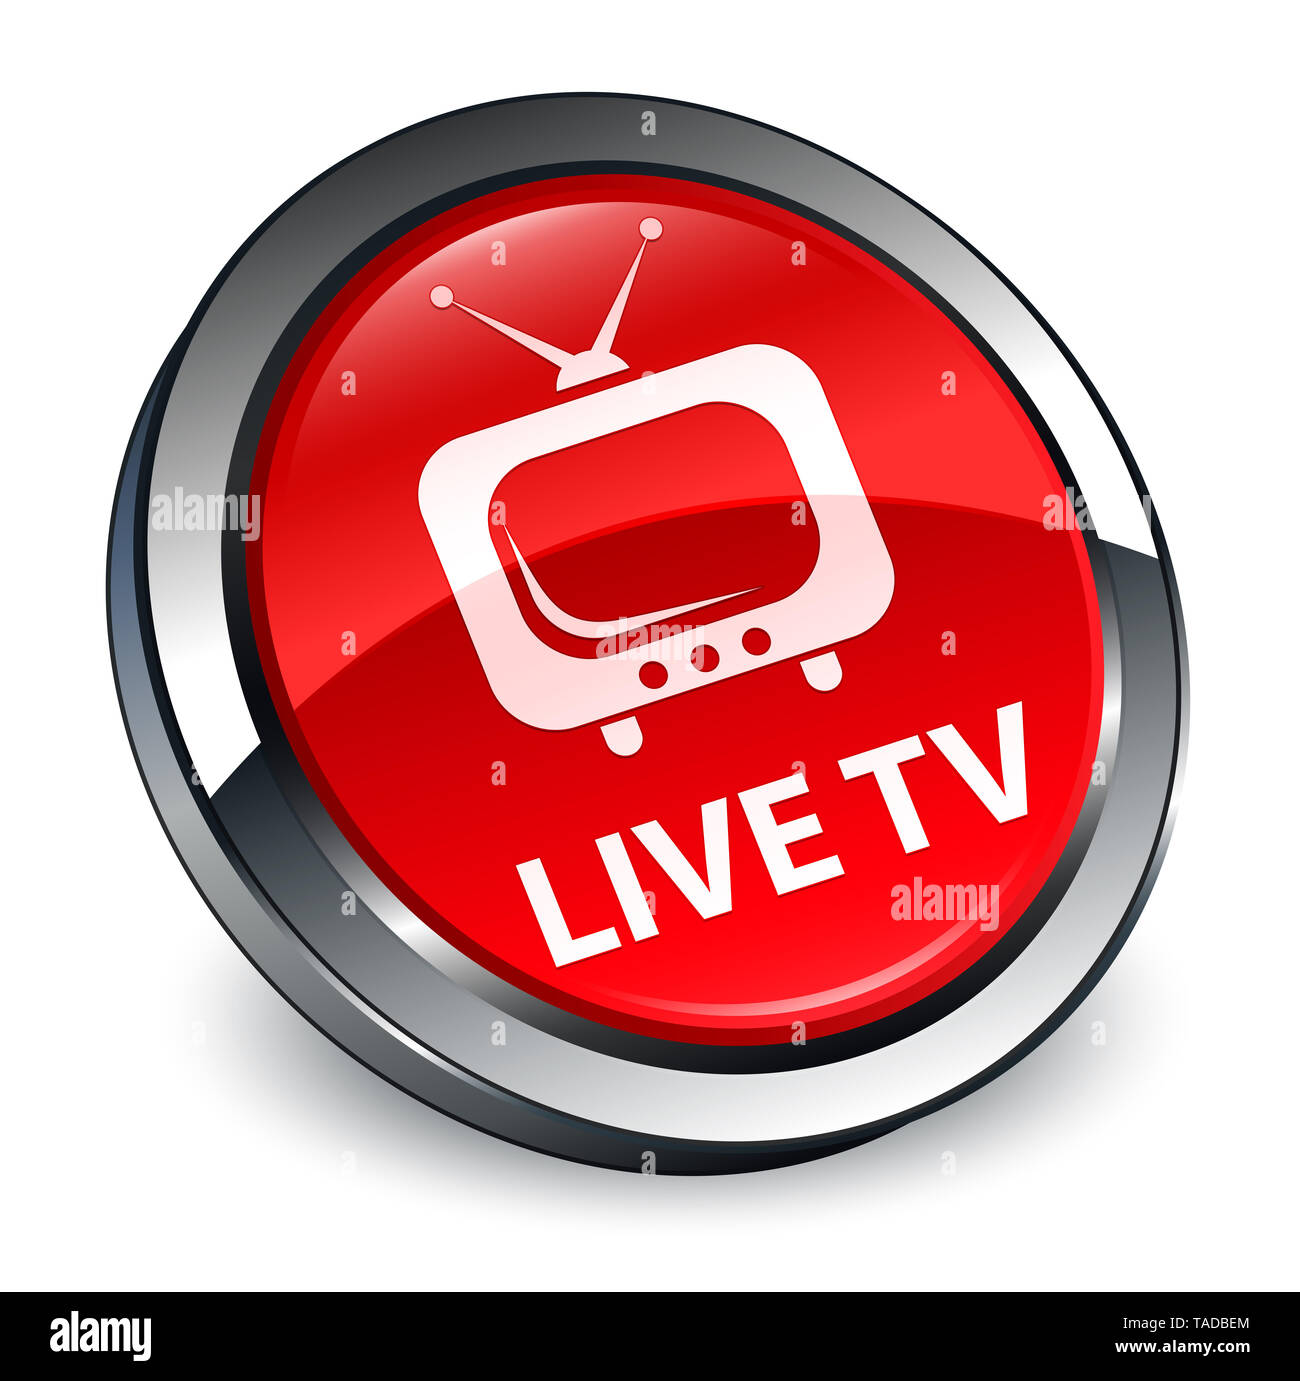 Live tv isolated on 3d red round button abstract illustration Stock Photo